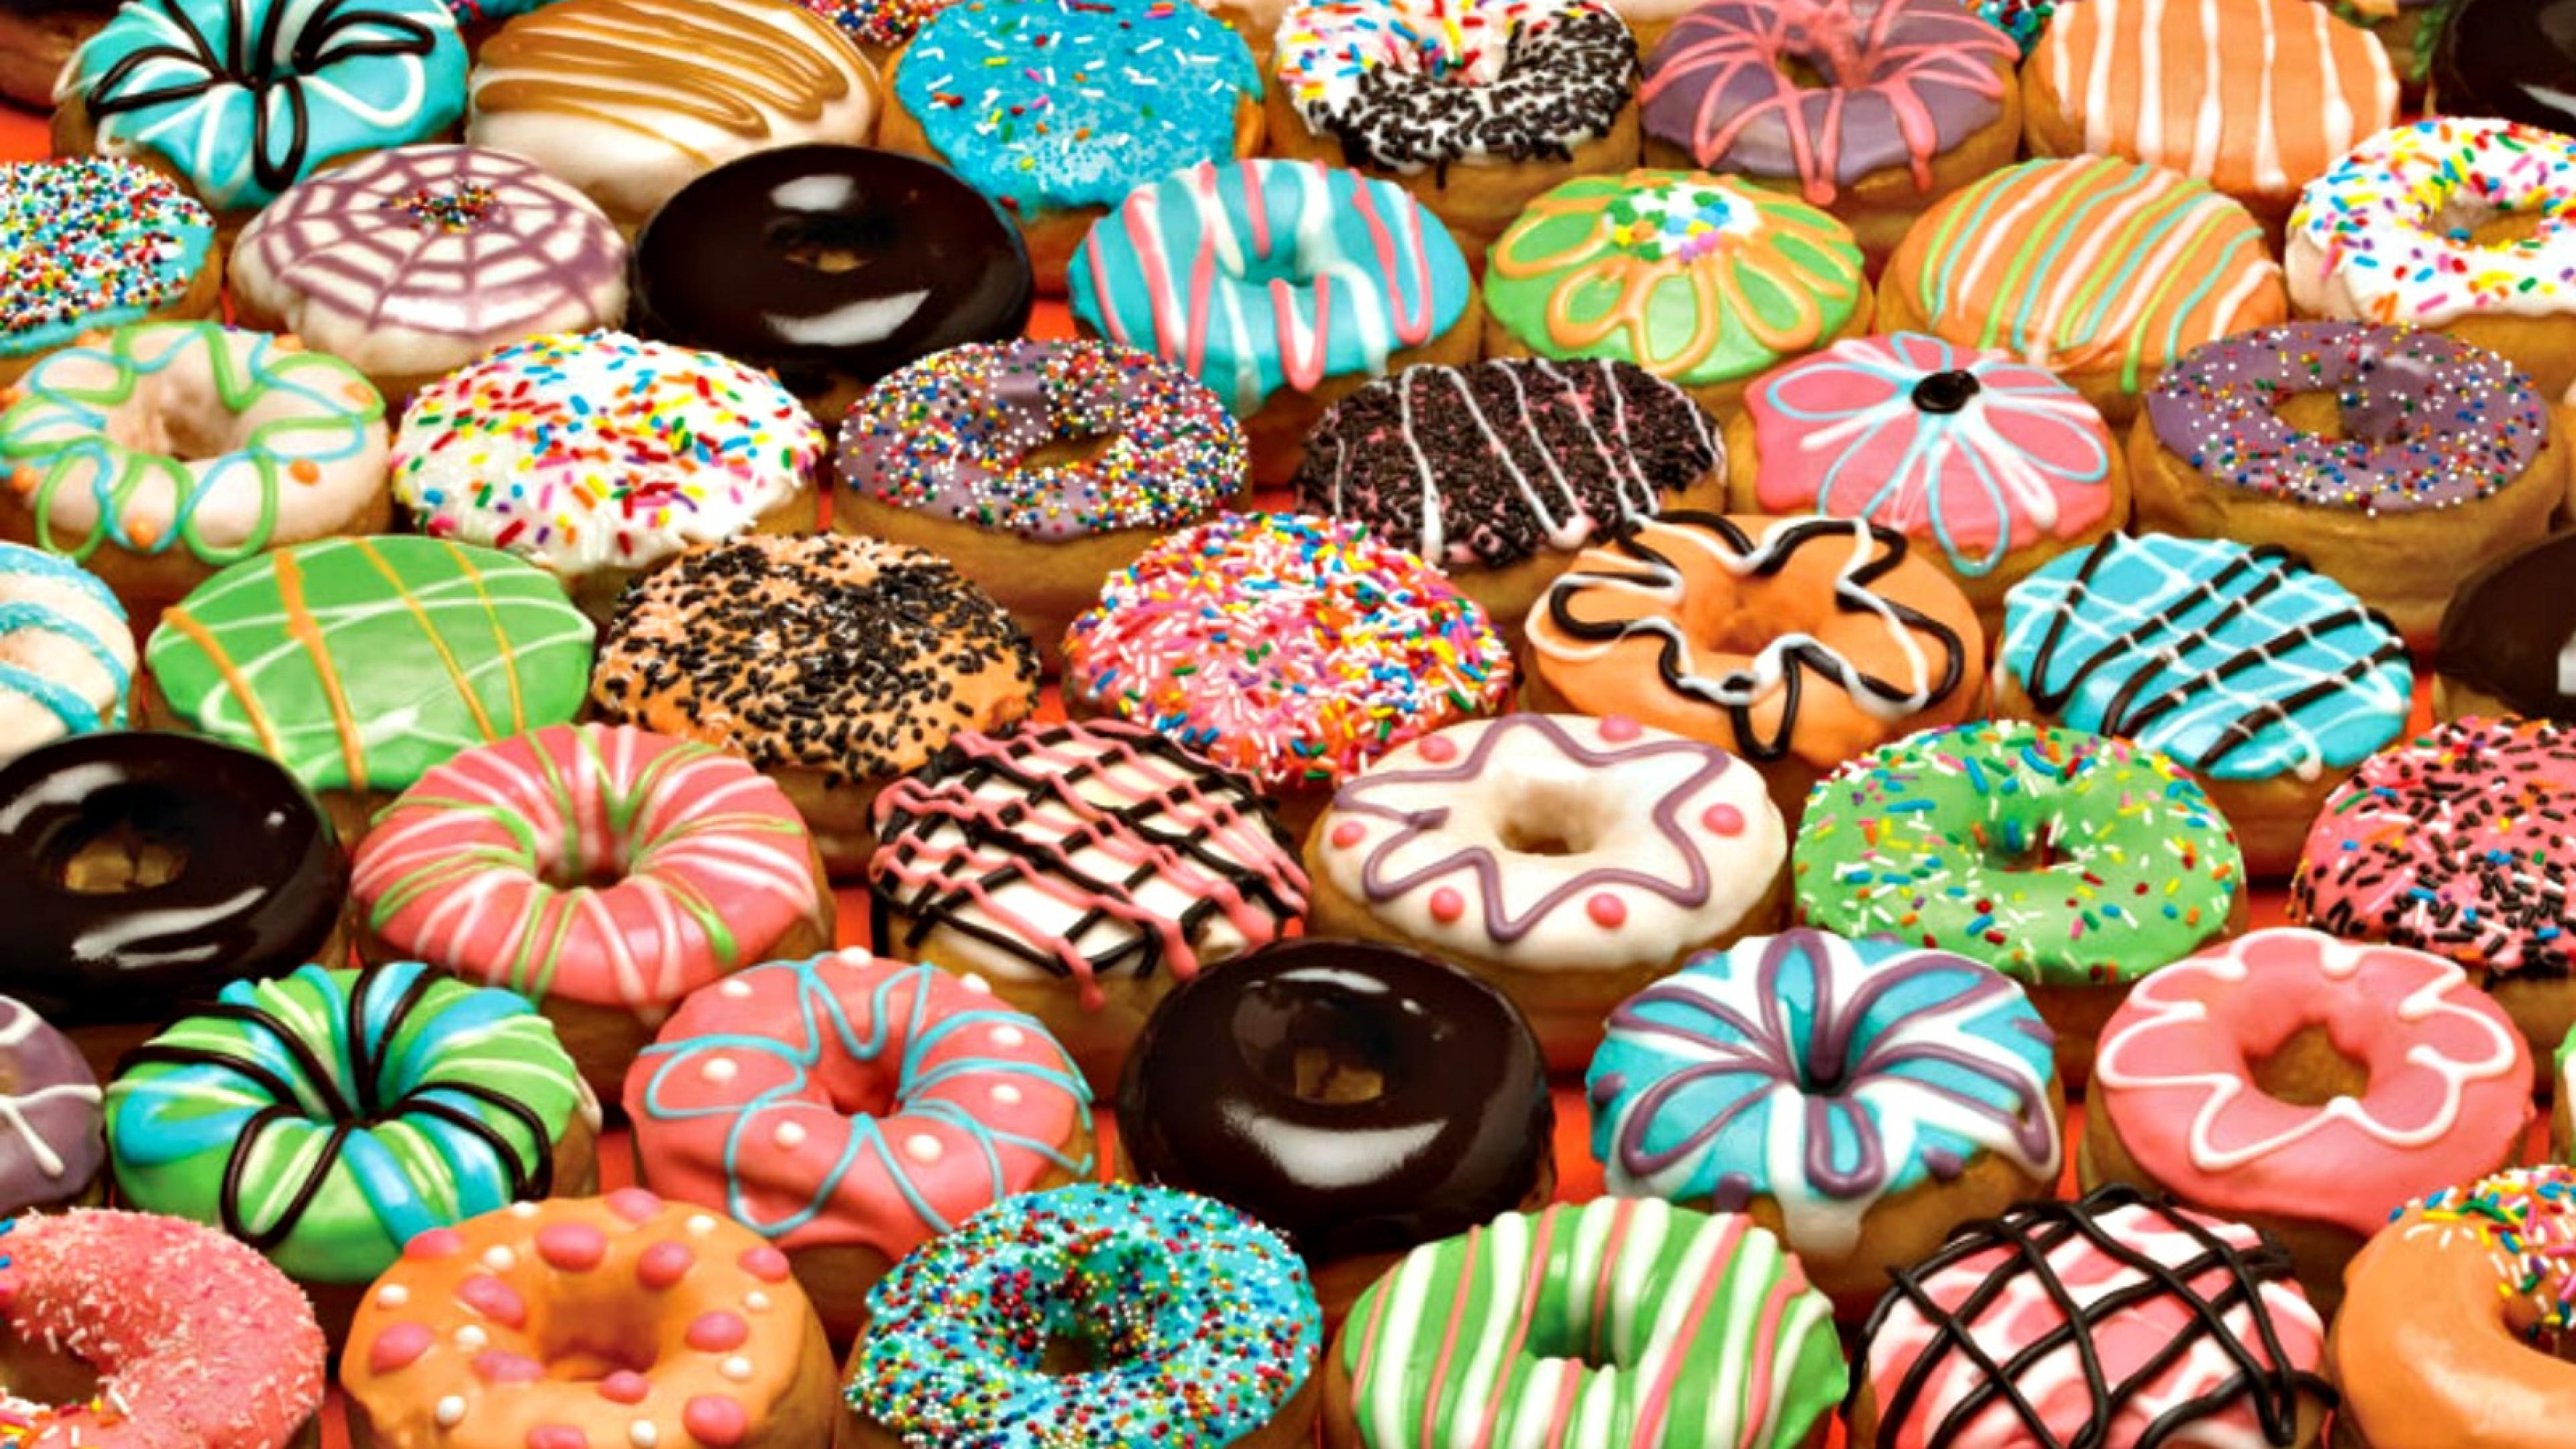 dunkin donuts wallpaper,sweetness,food,baked goods,dessert,confectionery